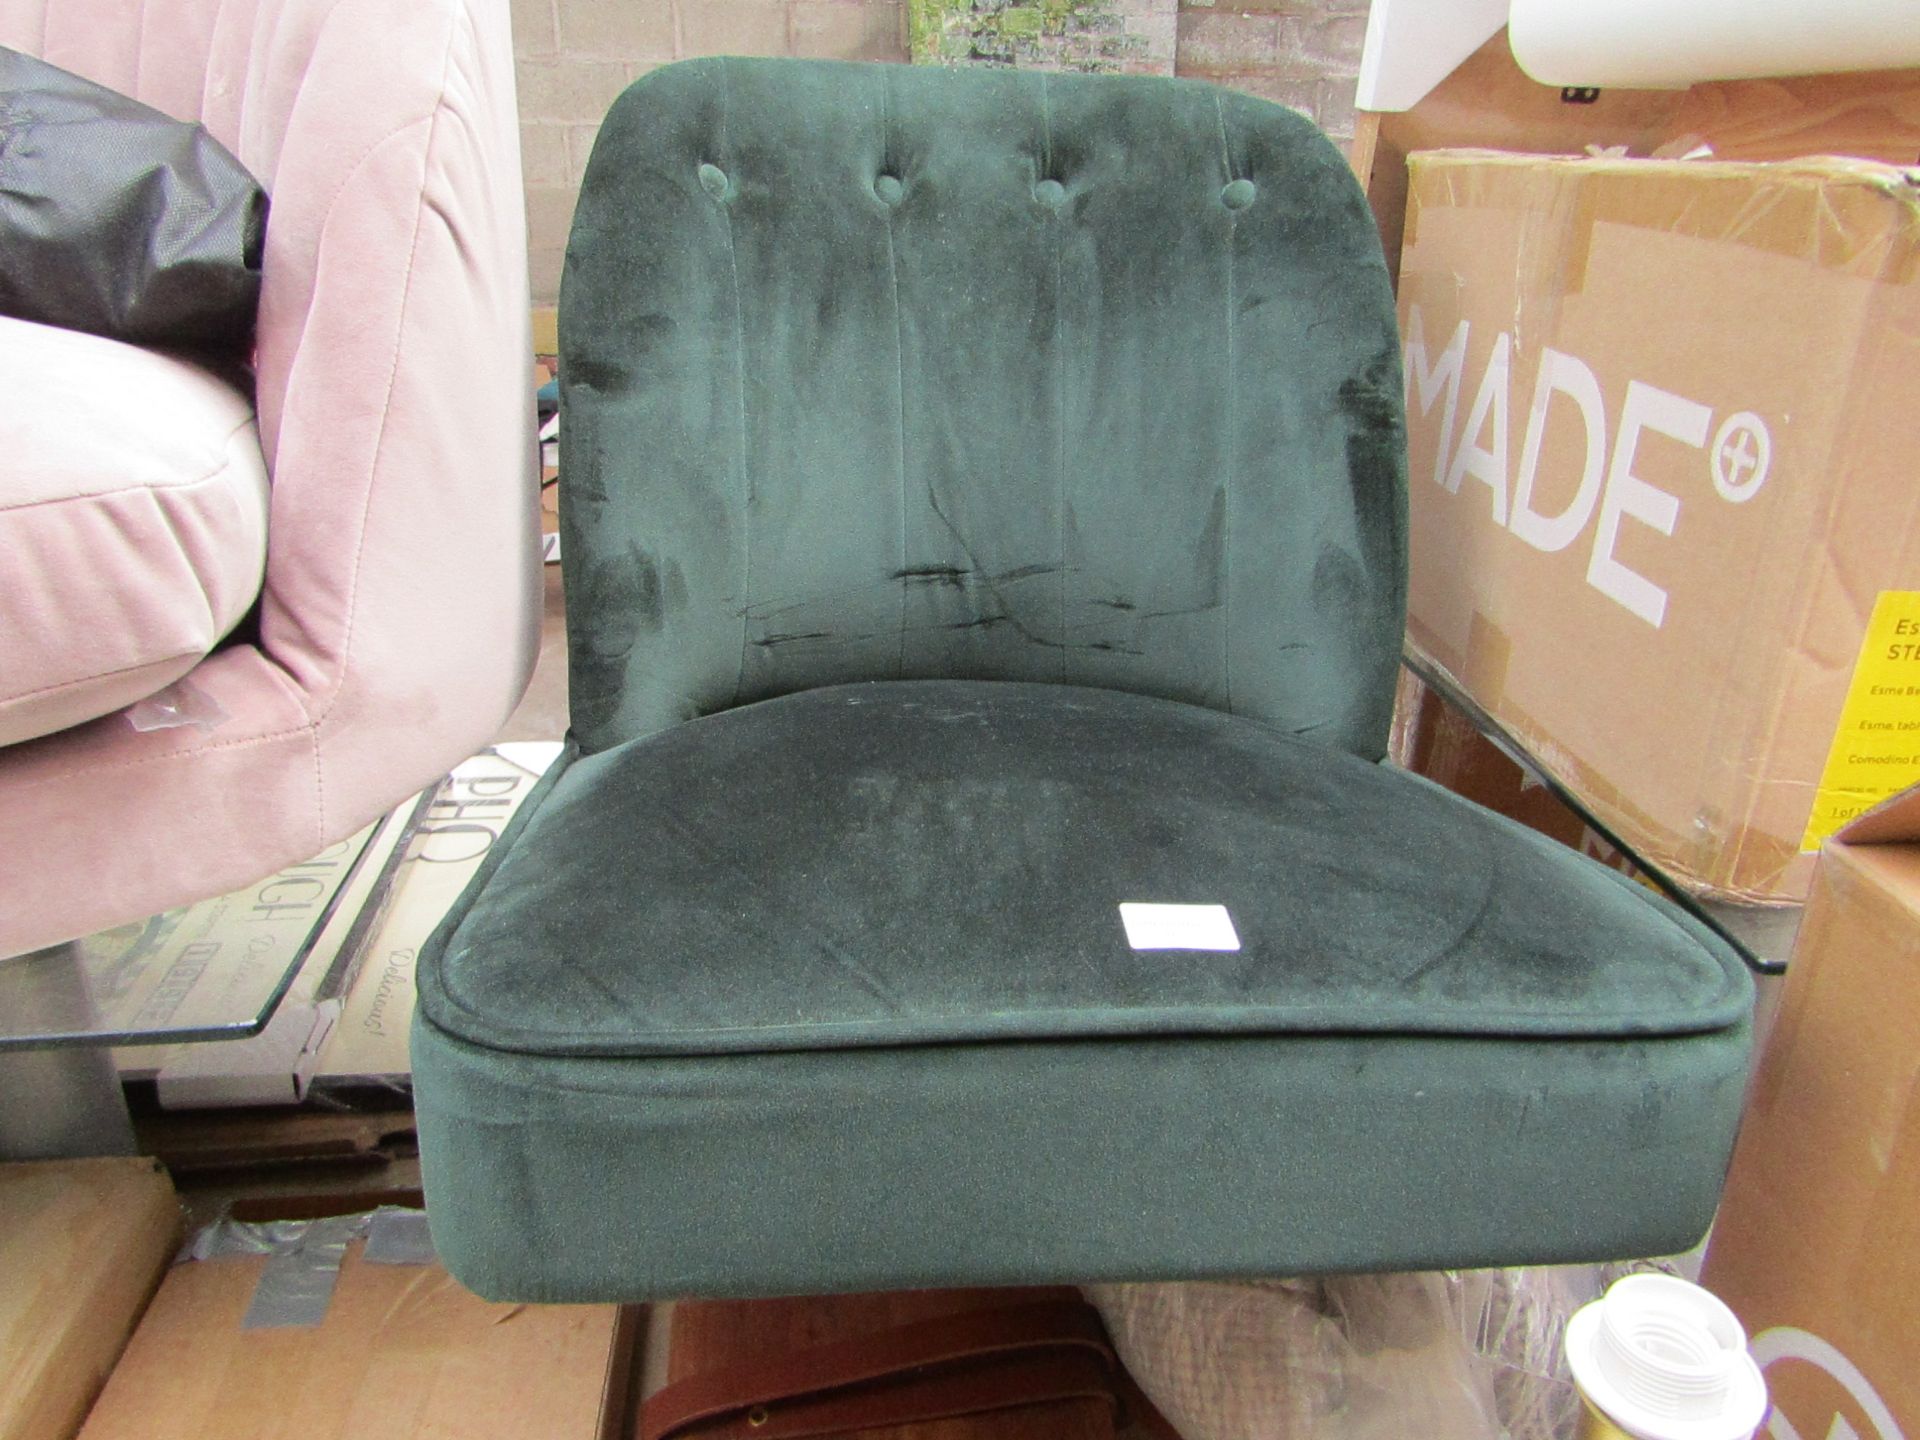 1 x Made.com Margot Office Chair Pine Green Velvet and Copper RRP £199.00 SKU MAD-CHAMAR113GRN-UK